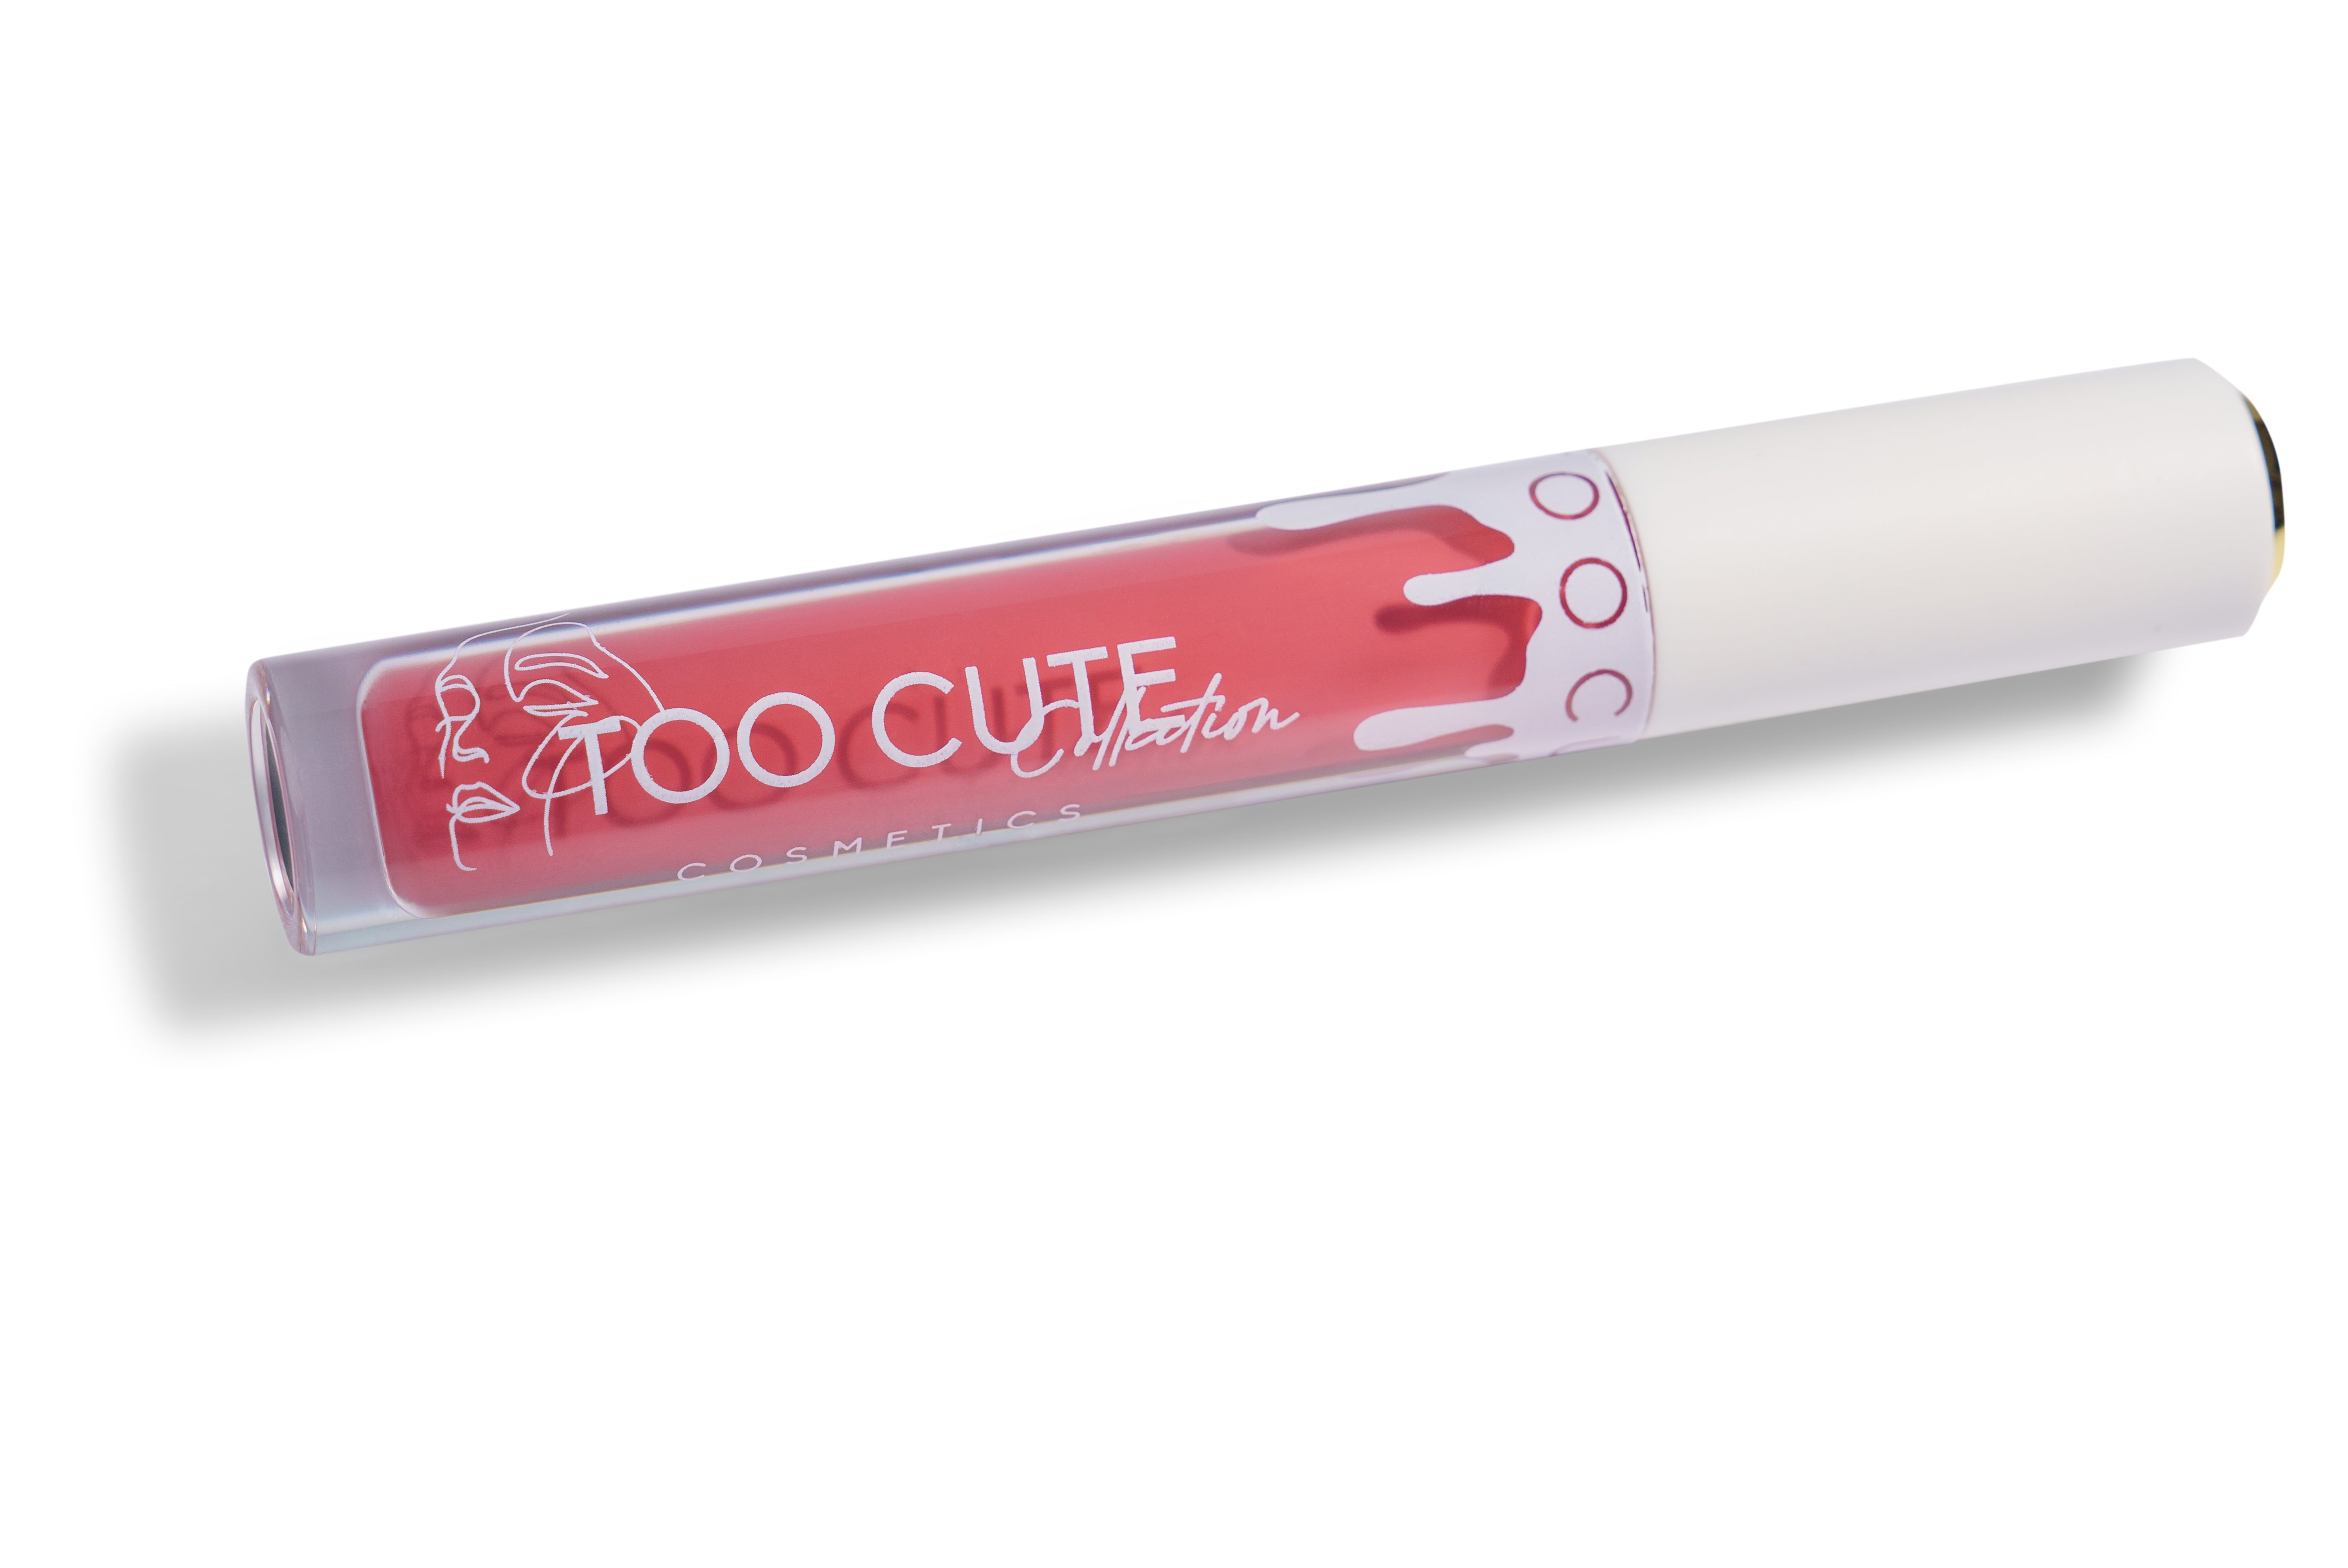 Too Cute Matte Collection Lipstick